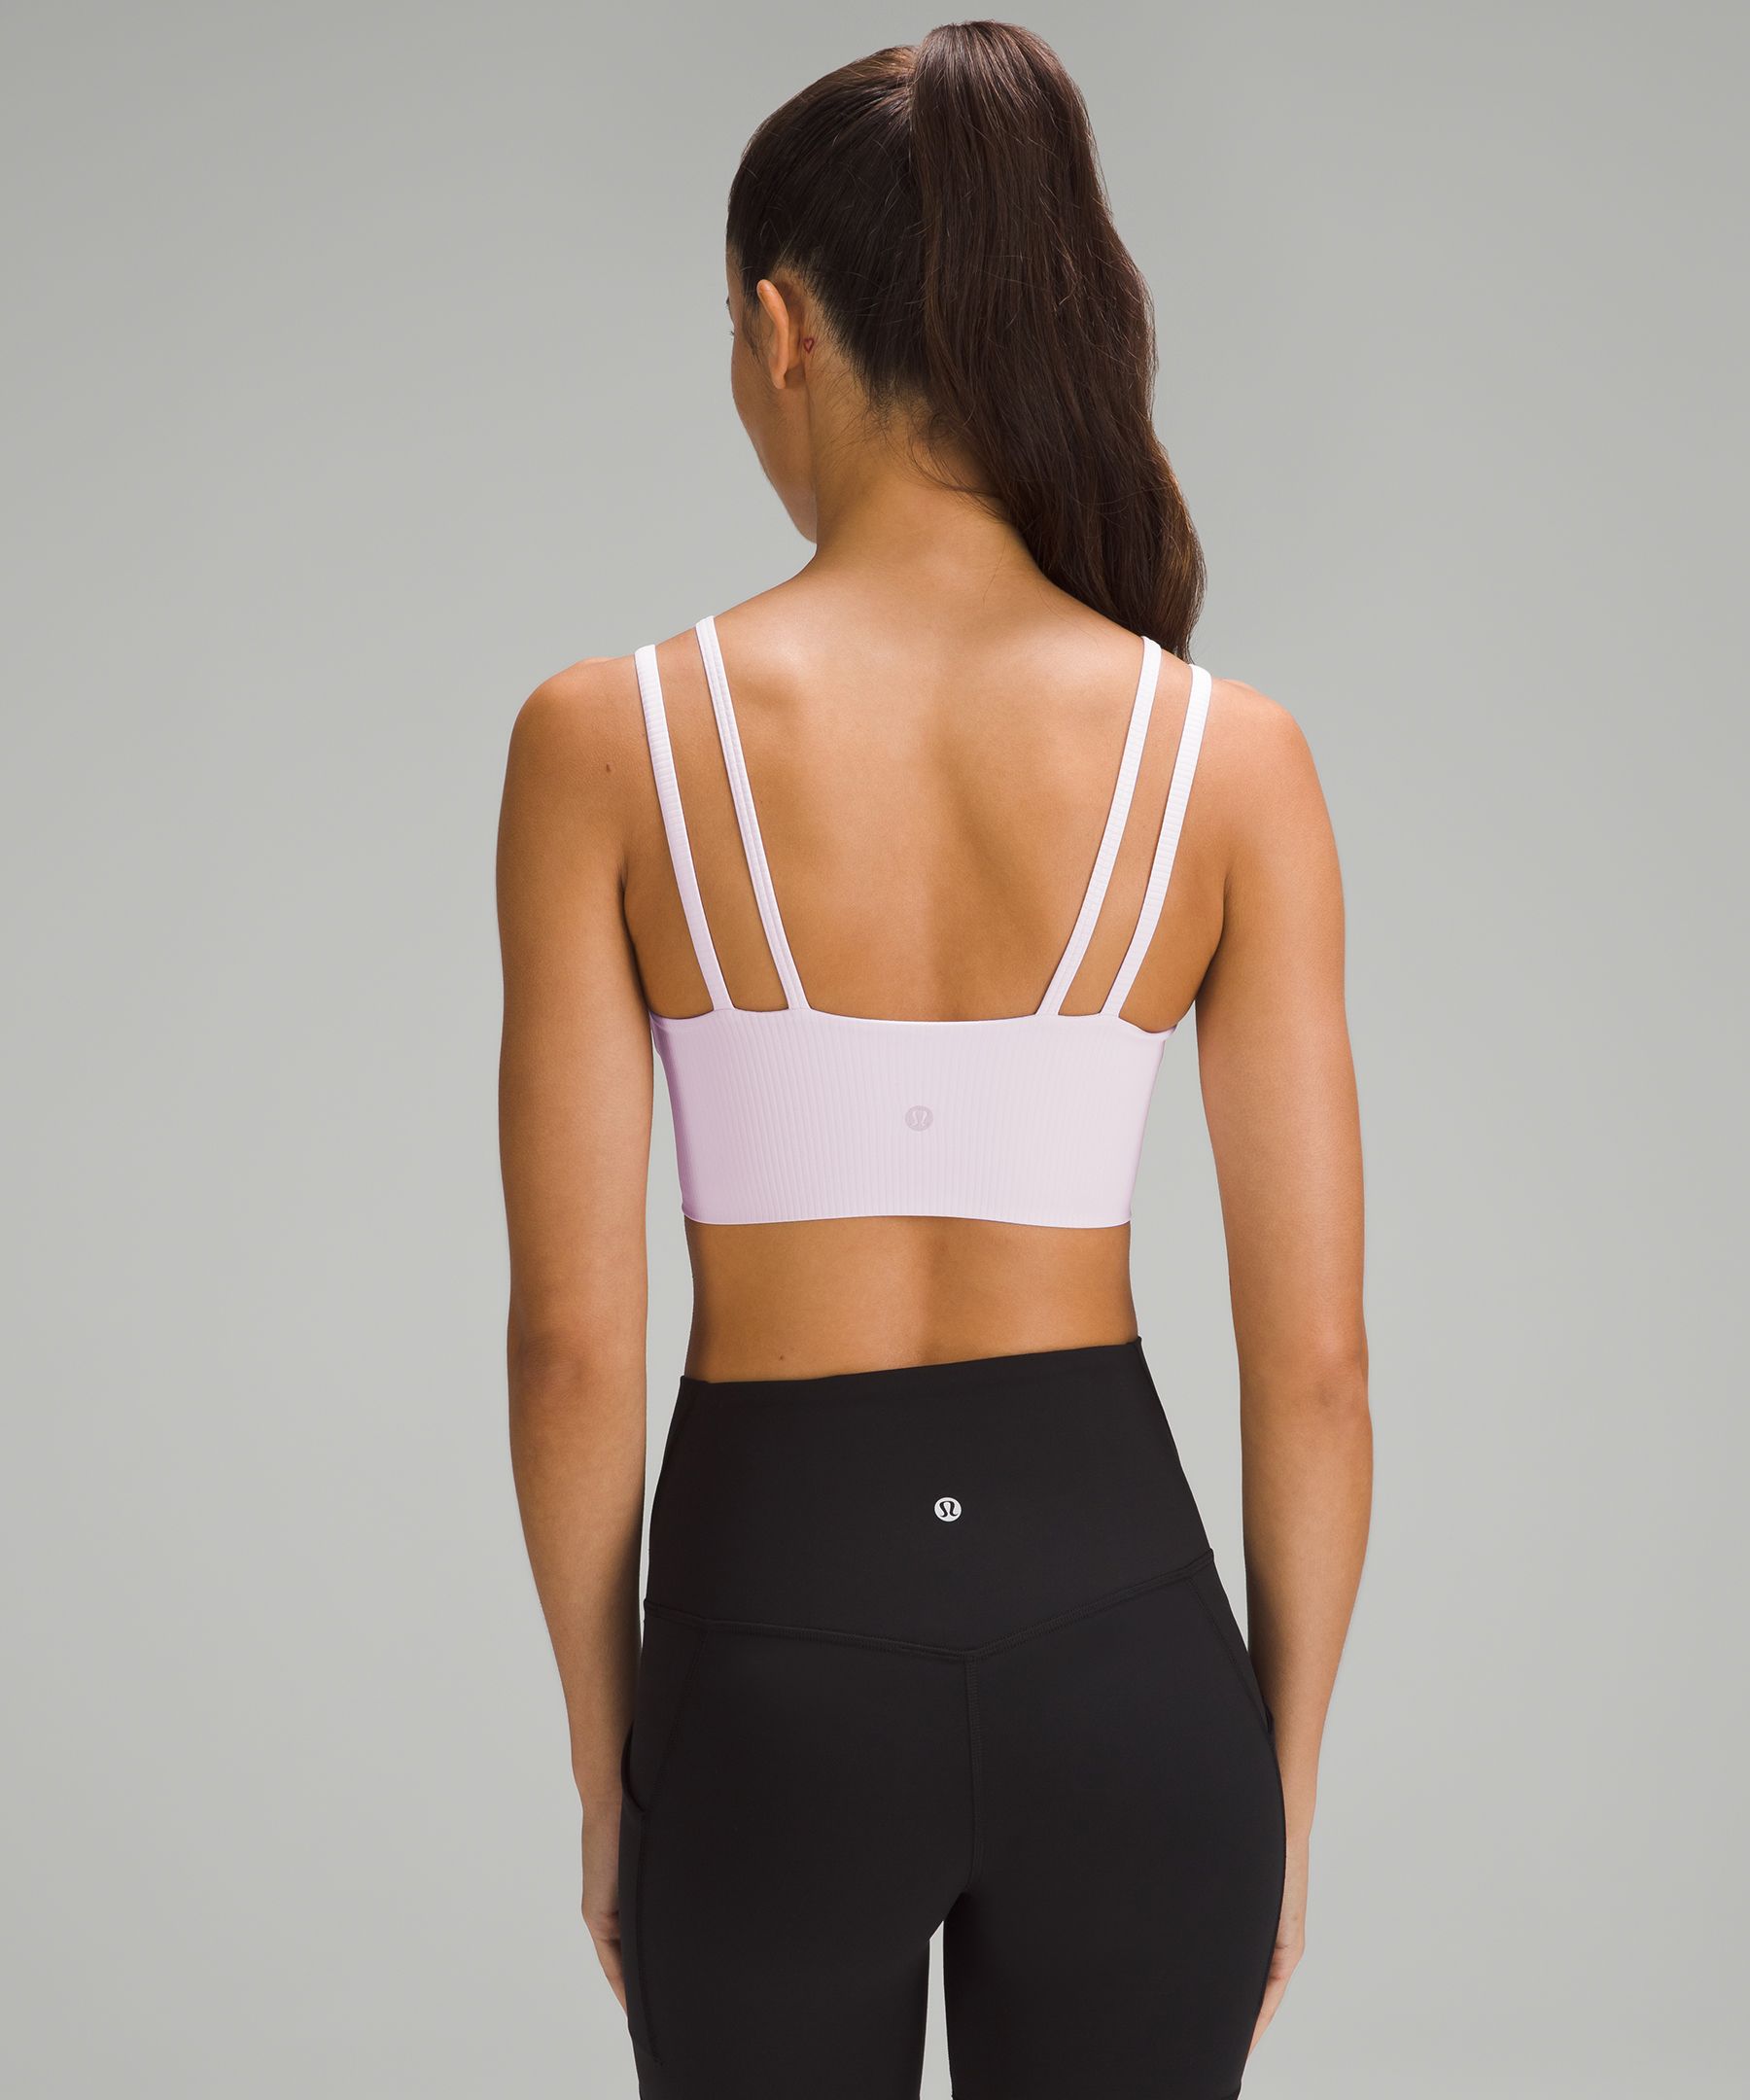 Lululemon Like a Cloud Sports Bra Look for Less from Aerie  Summer outfits  women, Casual summer outfit, Women's athletic wear